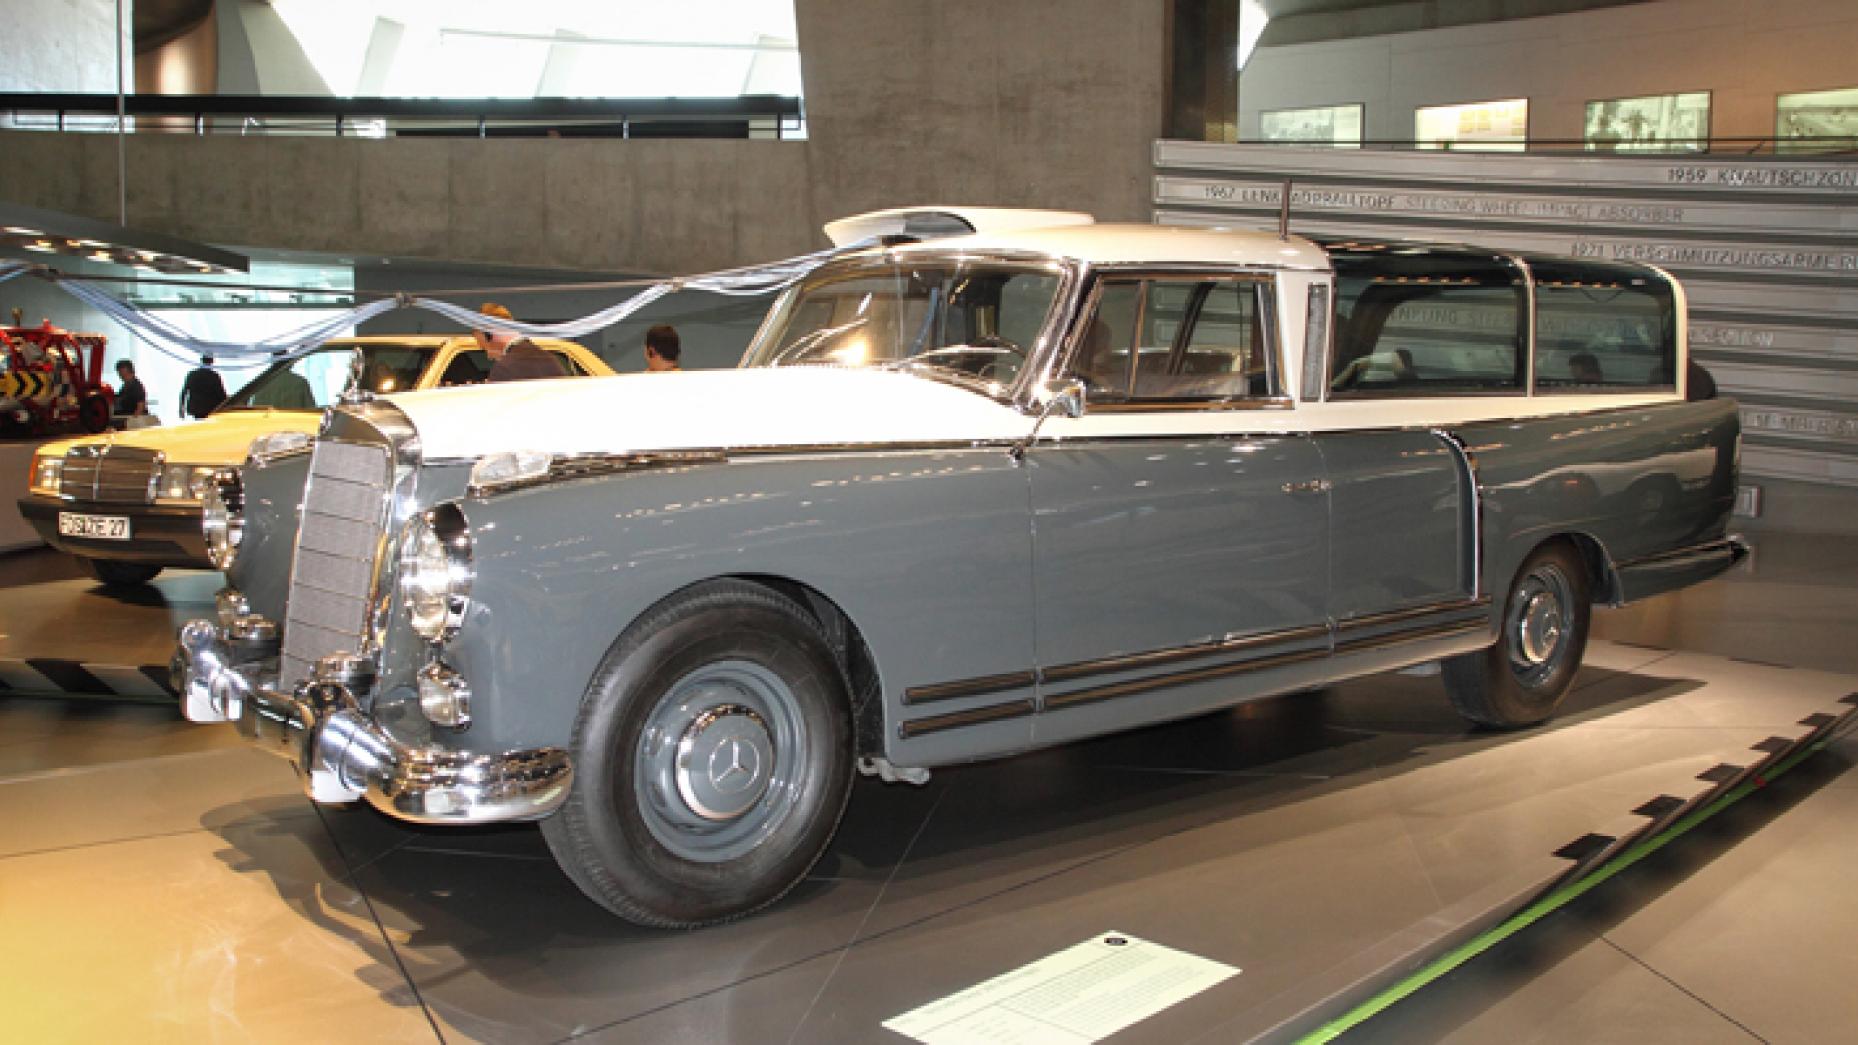 1960 MERCEDES-BENZ 300 MESSWAGEN: Think of it as an early version of the little black box. A one-off car equipped with measuring stuff to record data from test vehicles, read via that long cable connected to the test cars’ vital instruments. More than a little Back To The Future…